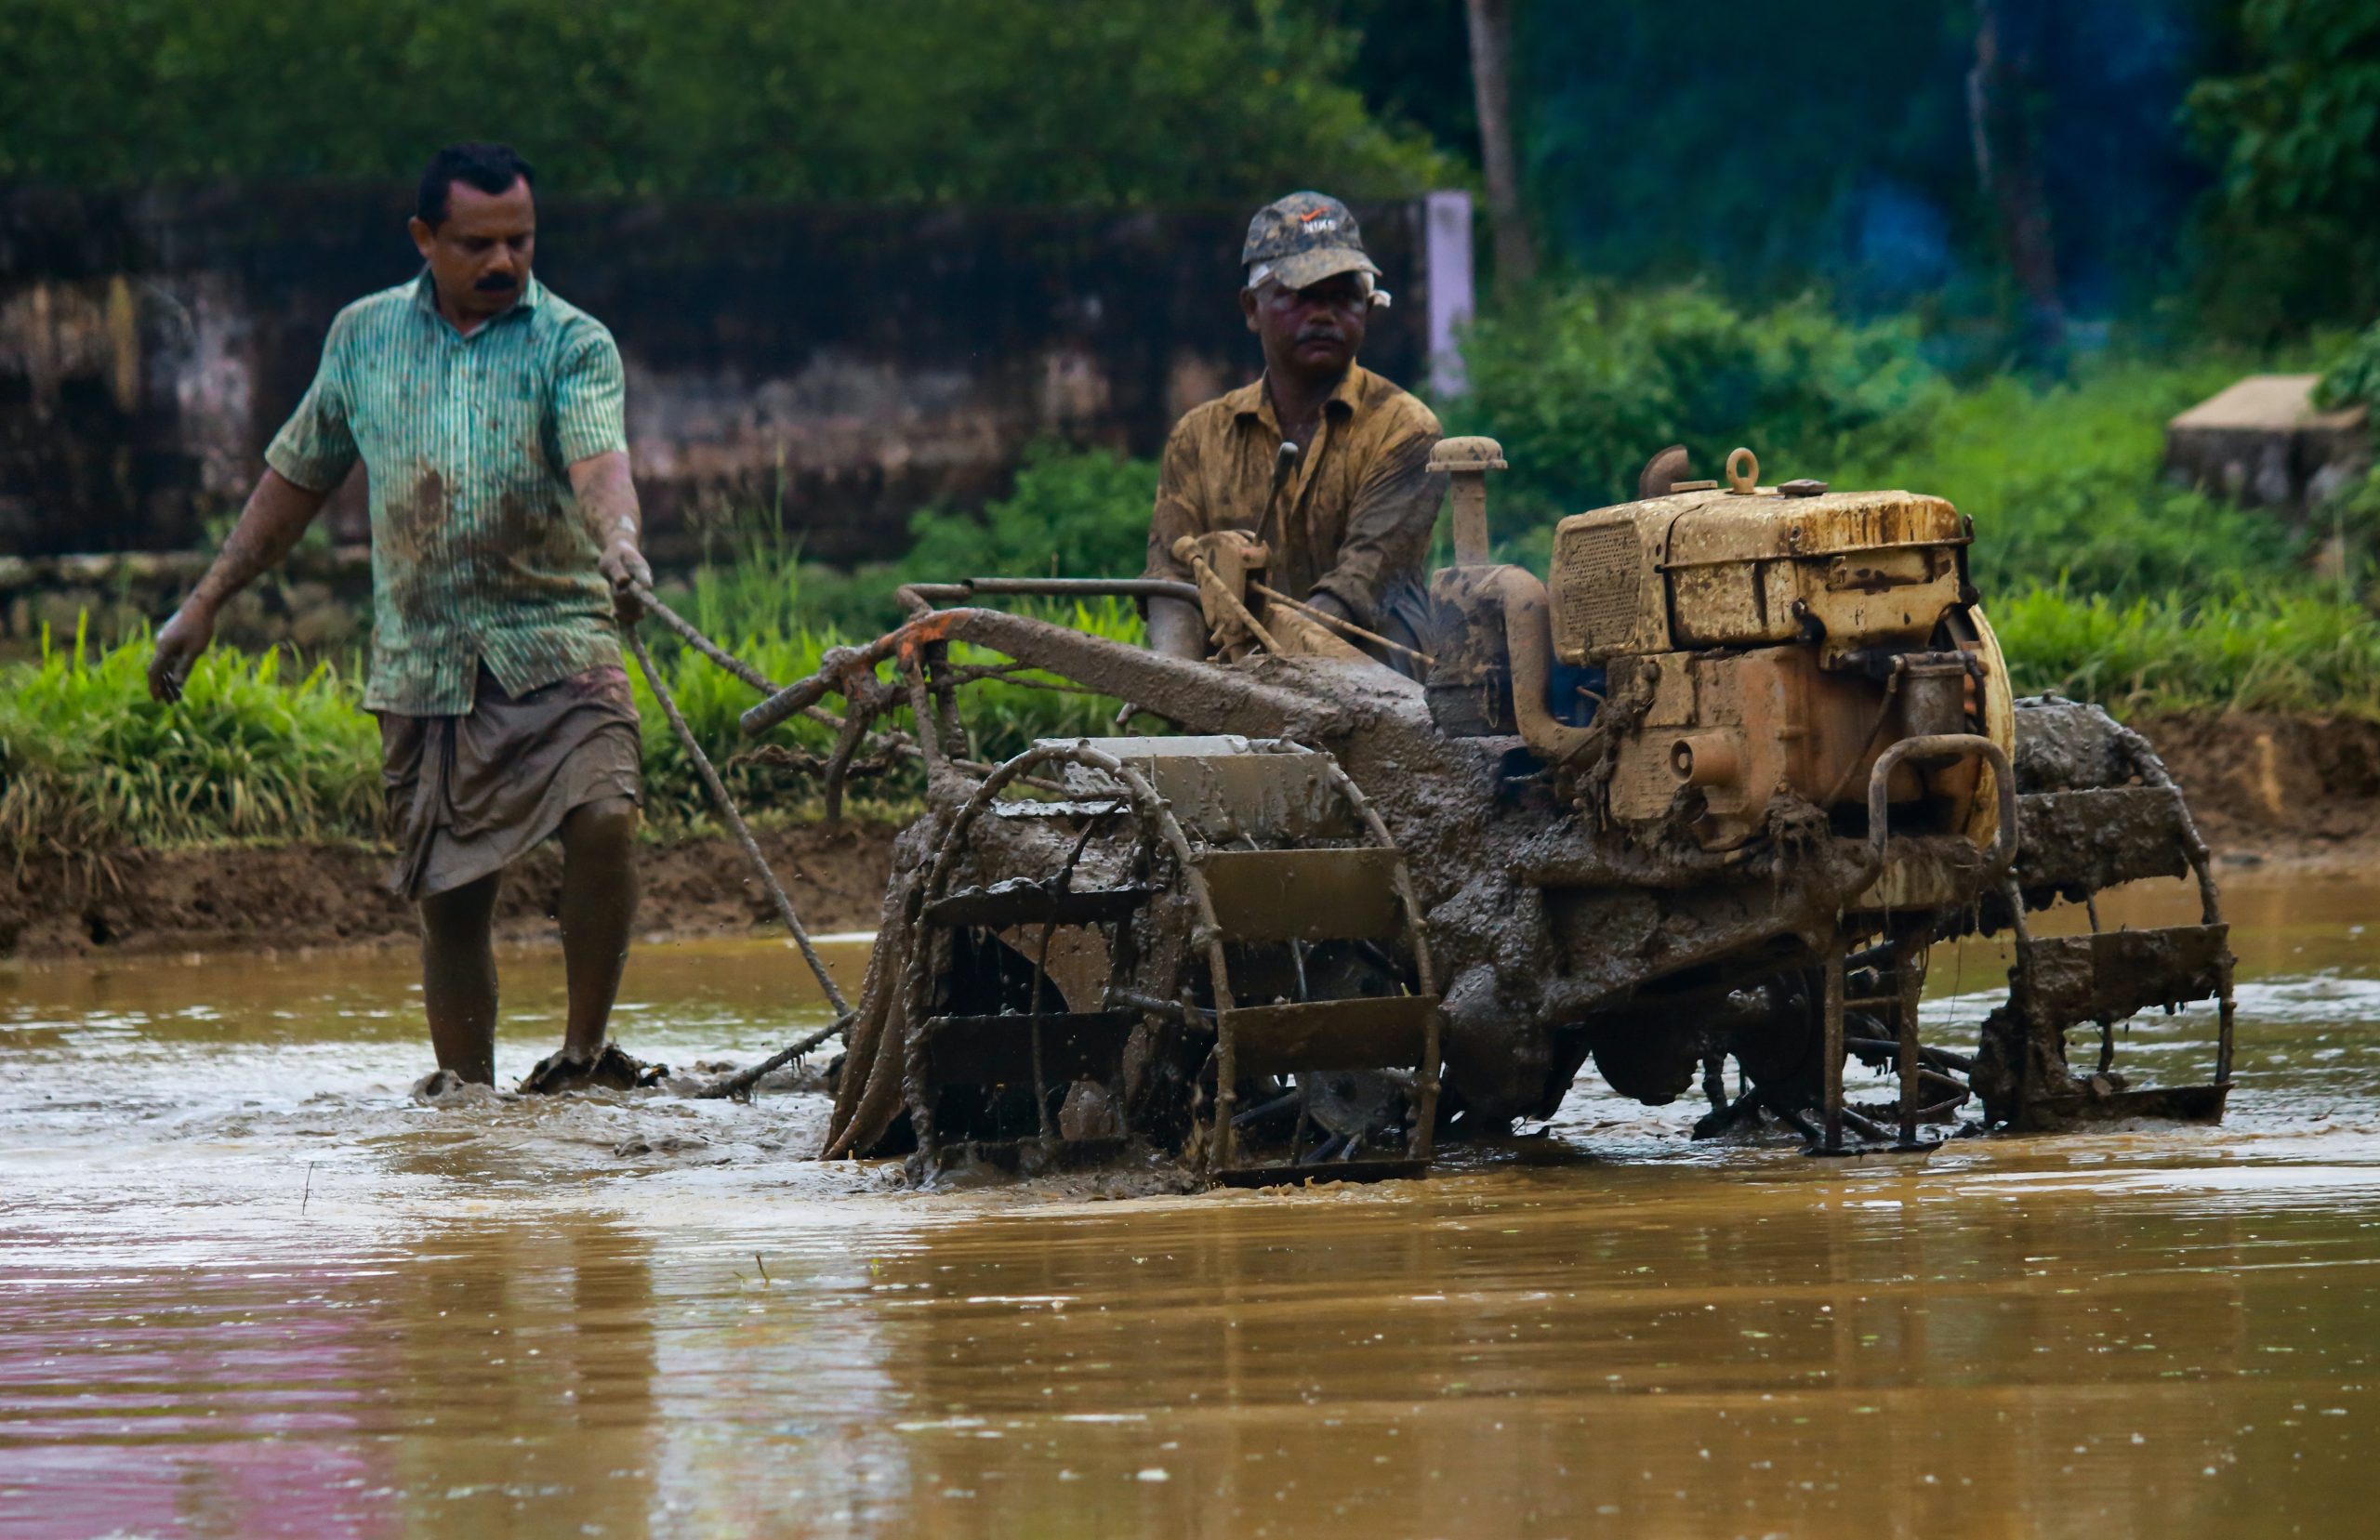 A man drives a tractor through a rice paddy